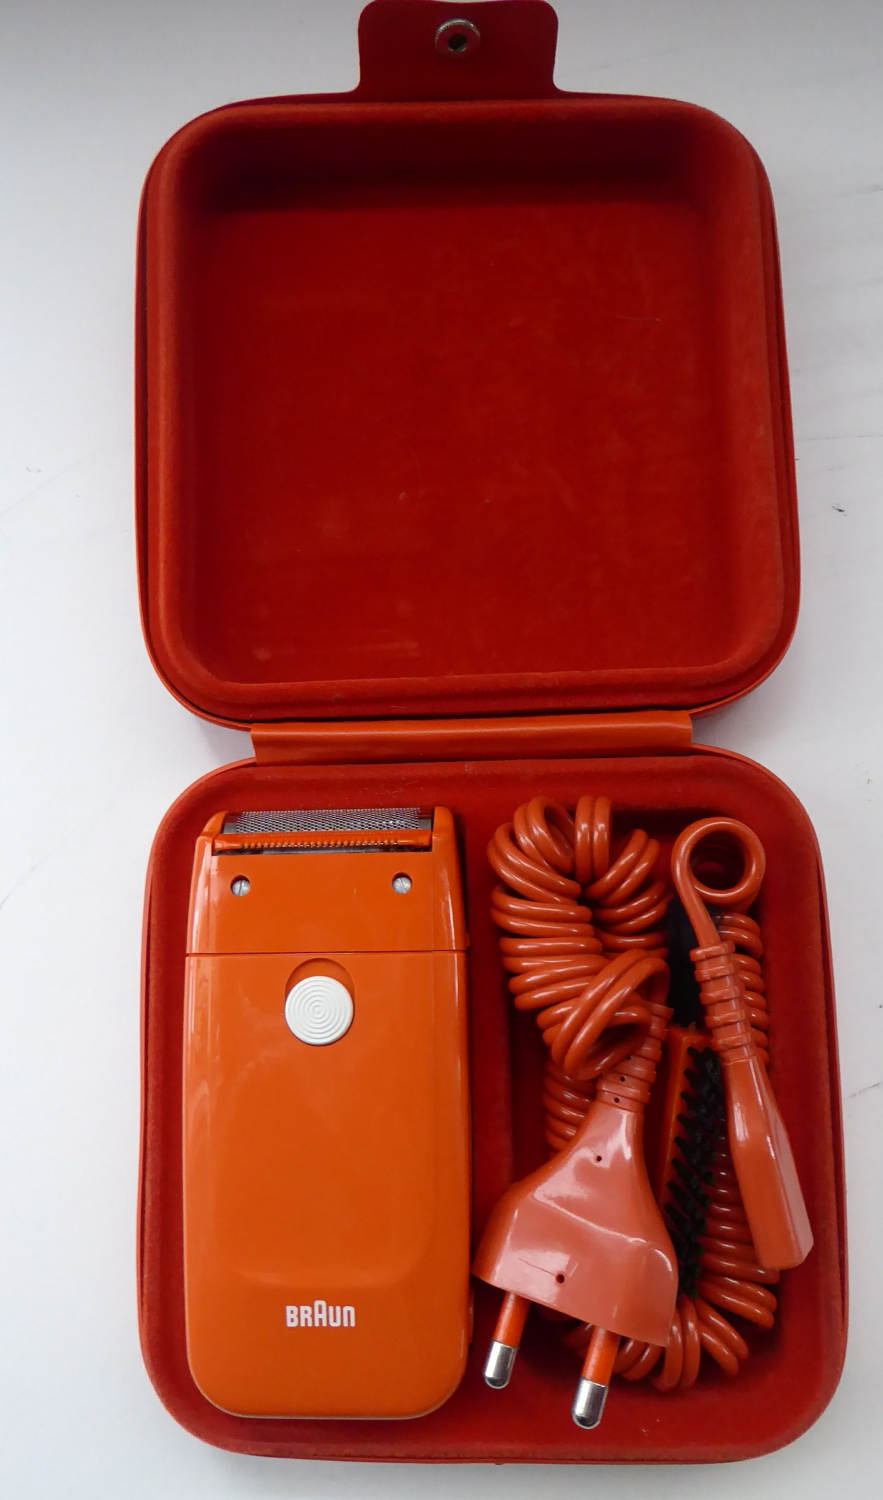 Orange Braun Electric Shaver, 1970s. Complete with original brush & in its own orange velvet lined carrying case